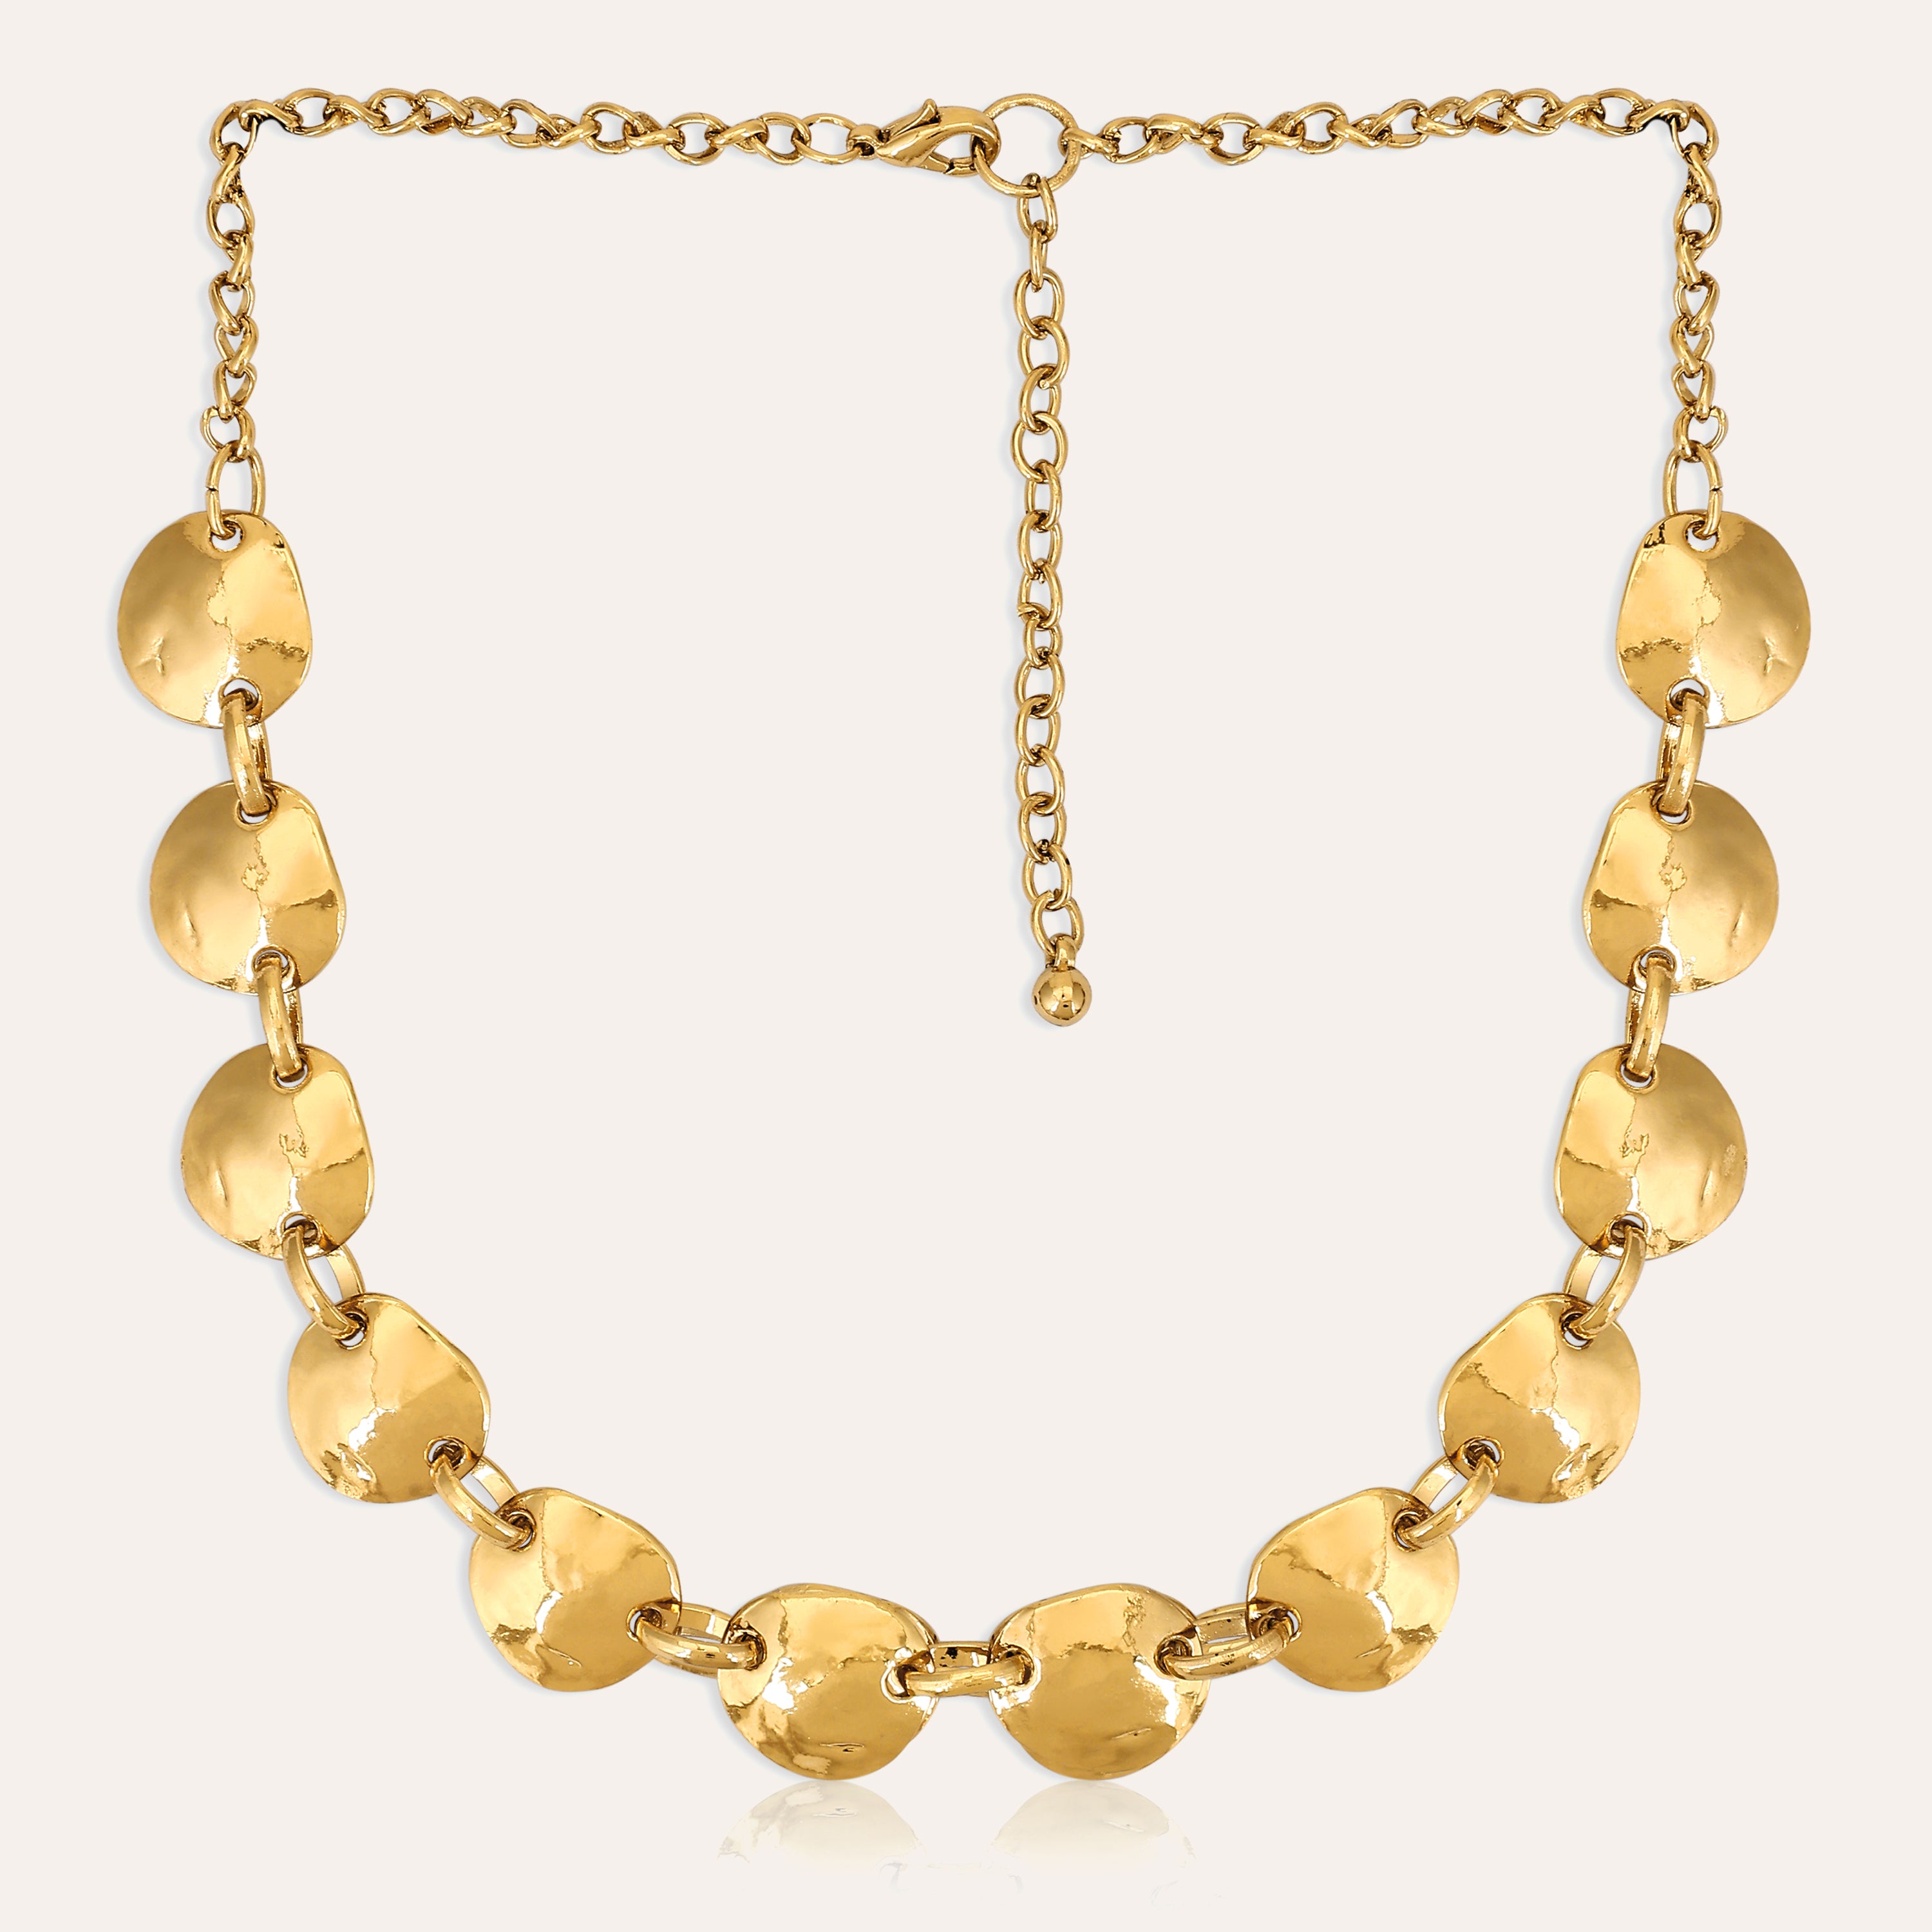 TFC Golden Stones Plated Necklace-Enhance your elegance with our collection of gold-plated necklaces for women. Choose from stunning pendant necklaces, chic choker necklaces, and trendy layered necklaces. Our sleek and dainty designs are both affordable and anti-tarnish, ensuring lasting beauty. Enjoy the cheapest fashion jewellery, lightweight and stylish- only at The Fun Company